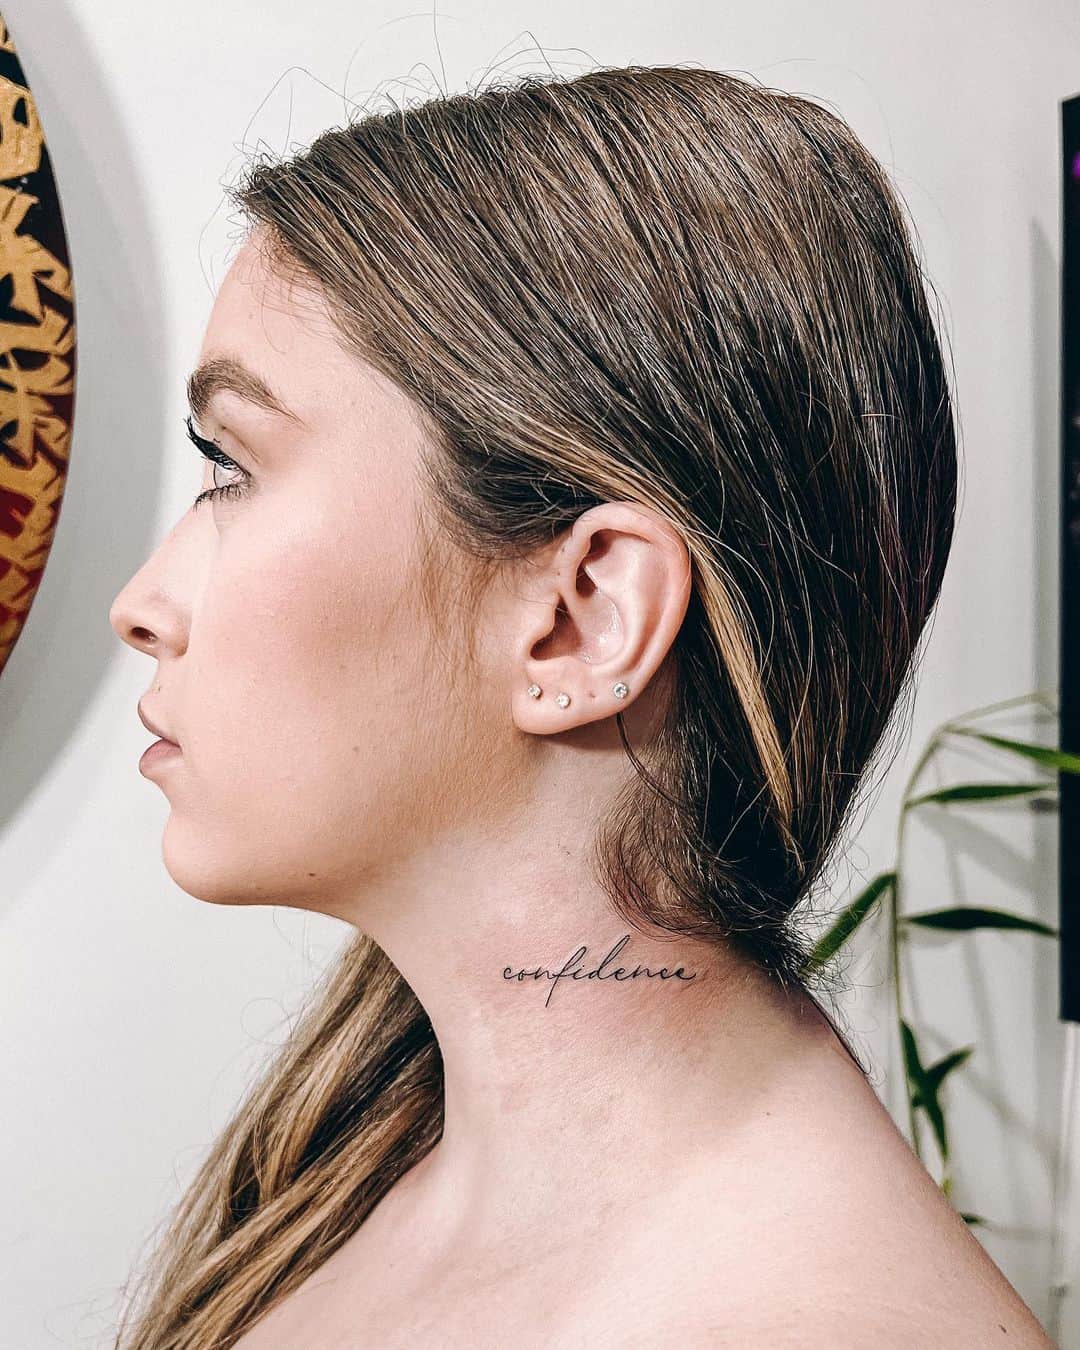 60 Creative and Bold Neck Tattoos | Art and Design